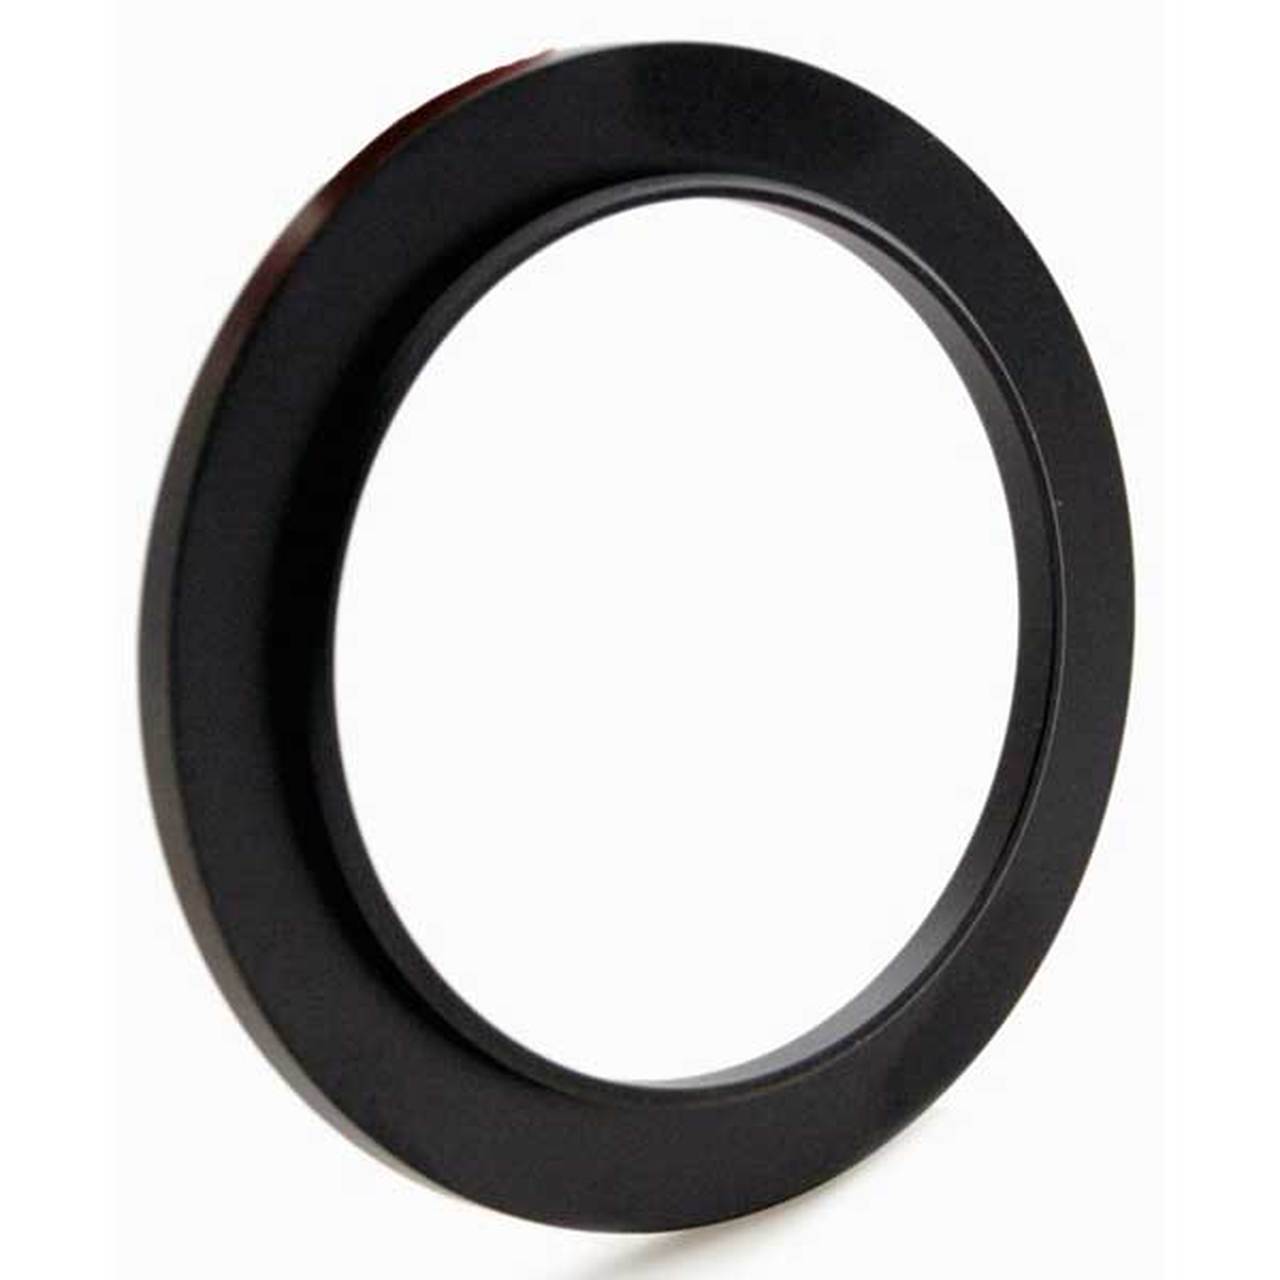 Promaster 5110 67-77mm Step-Up Ring